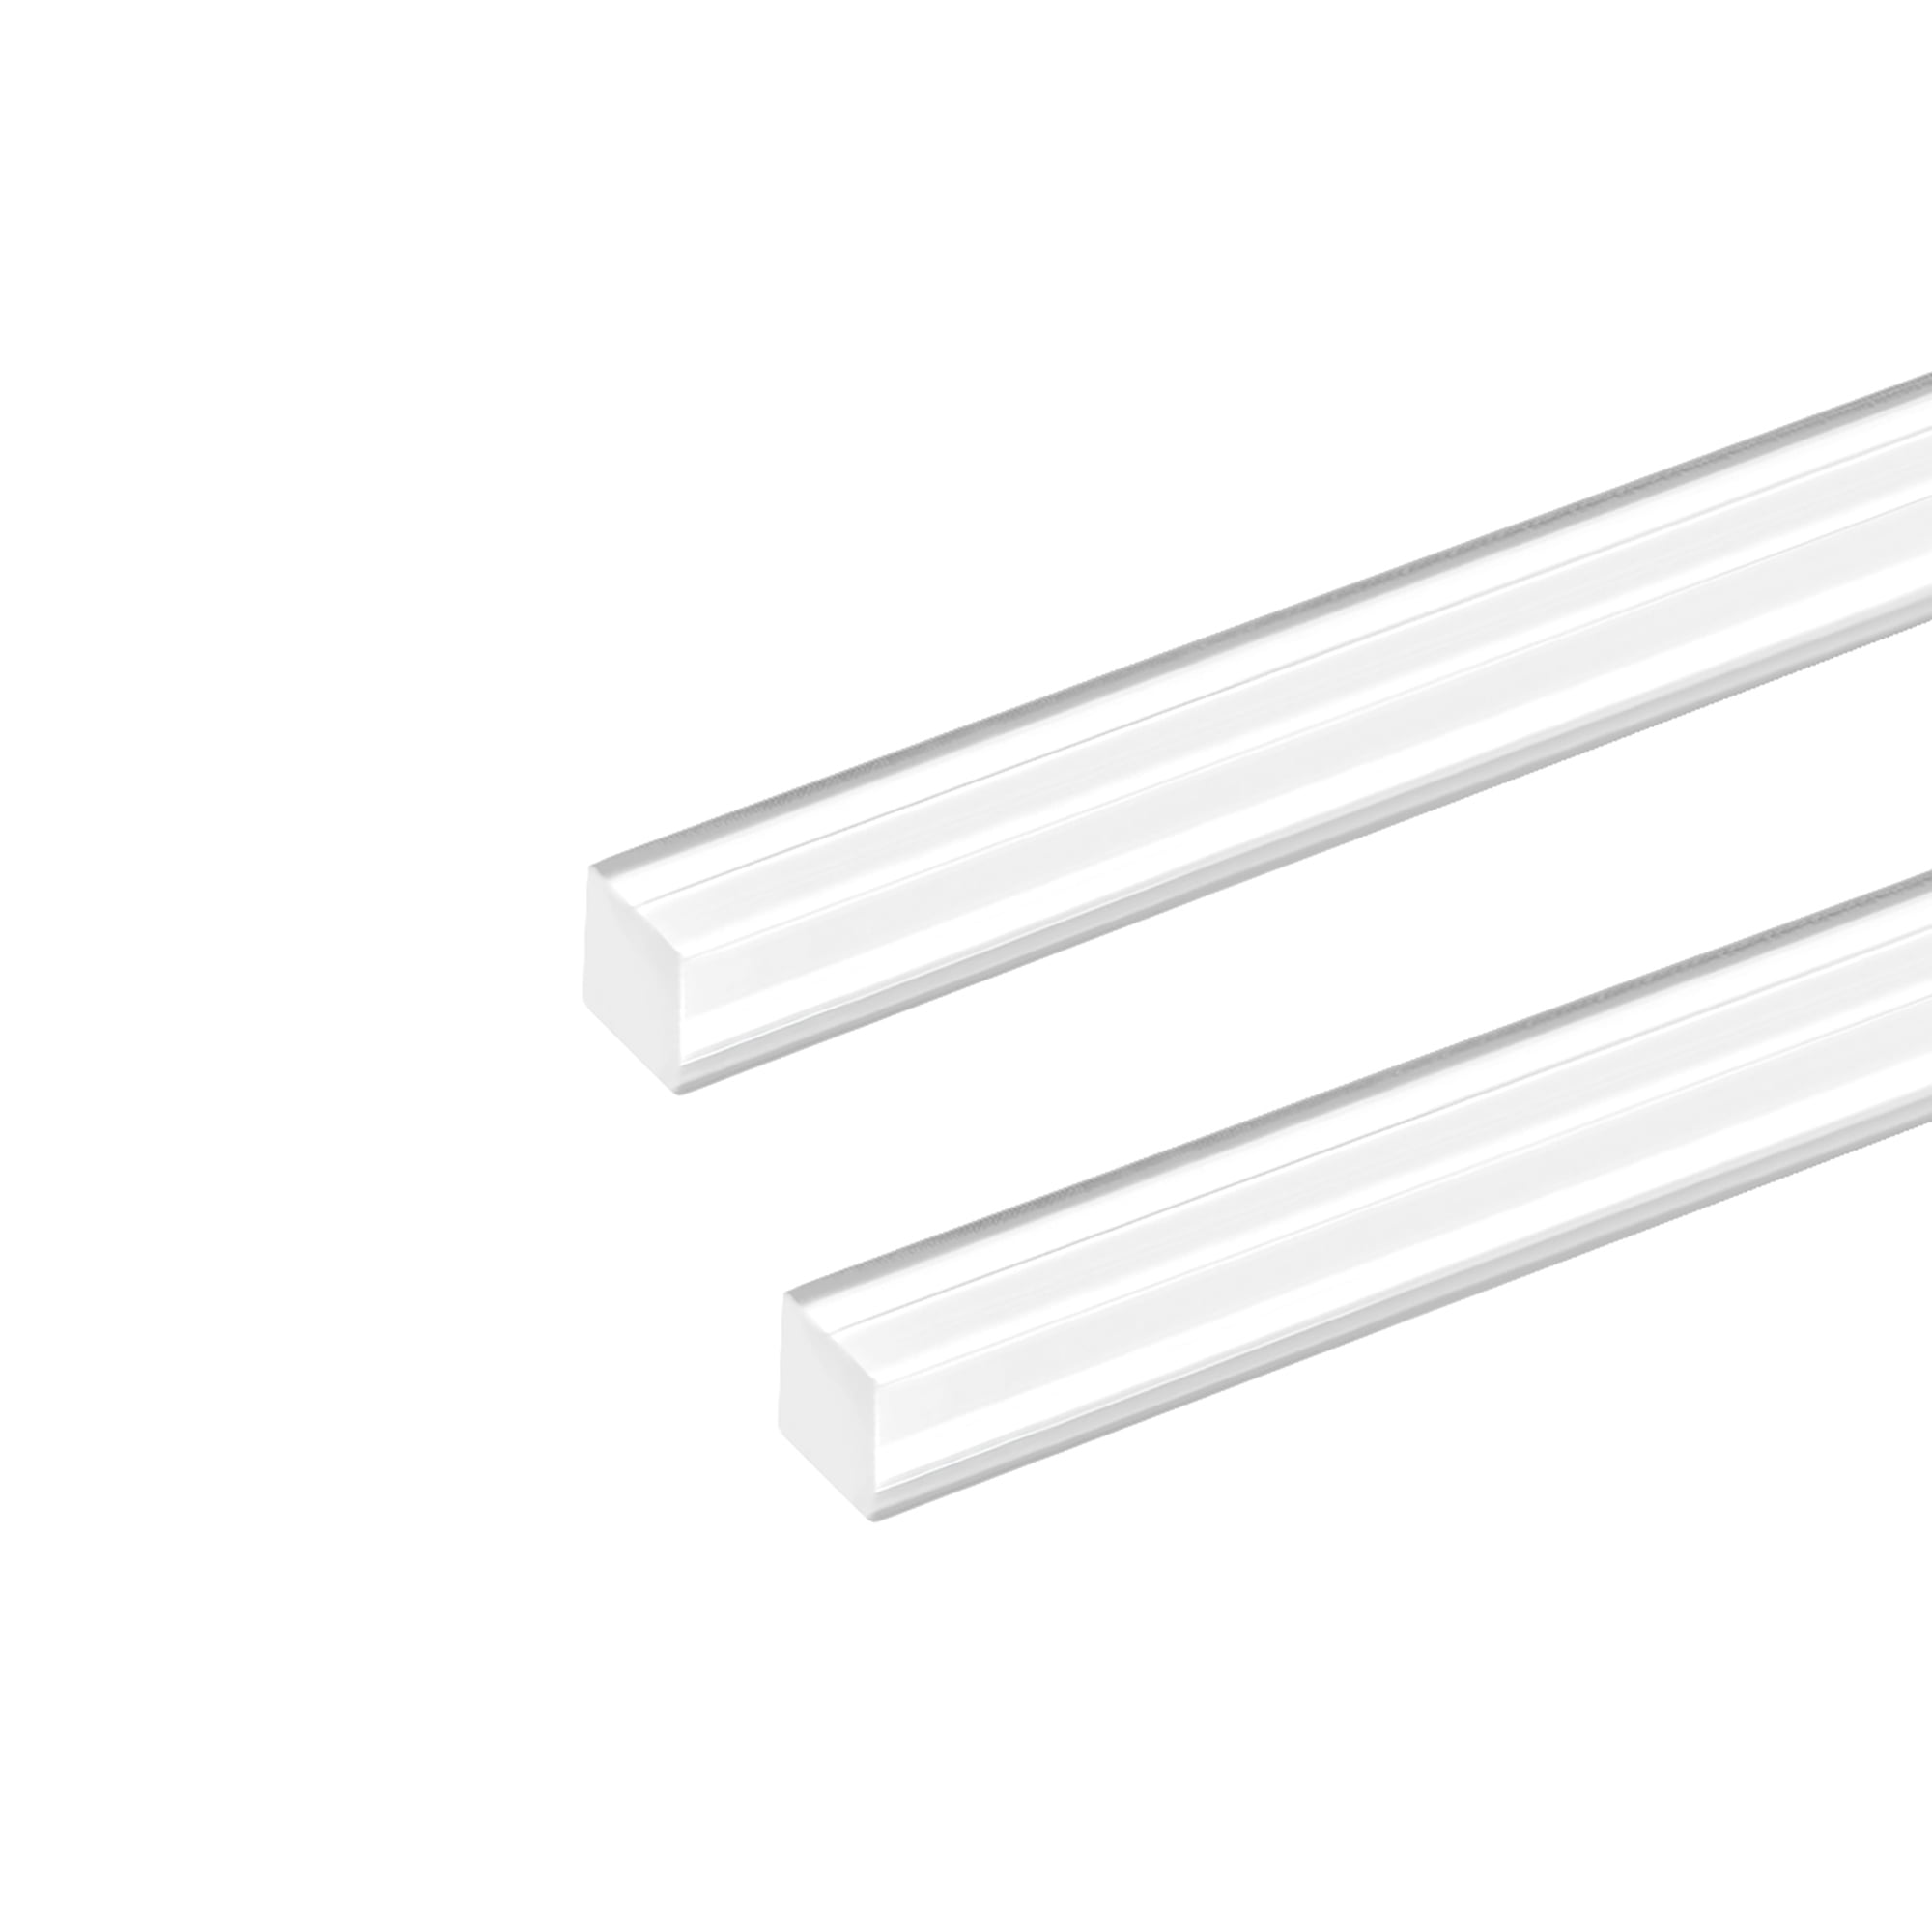 Square Acrylic Rod 8 mm x 8 mm x 20 inches Clear Plastic bar Solid PMMA bar 3 Pieces 